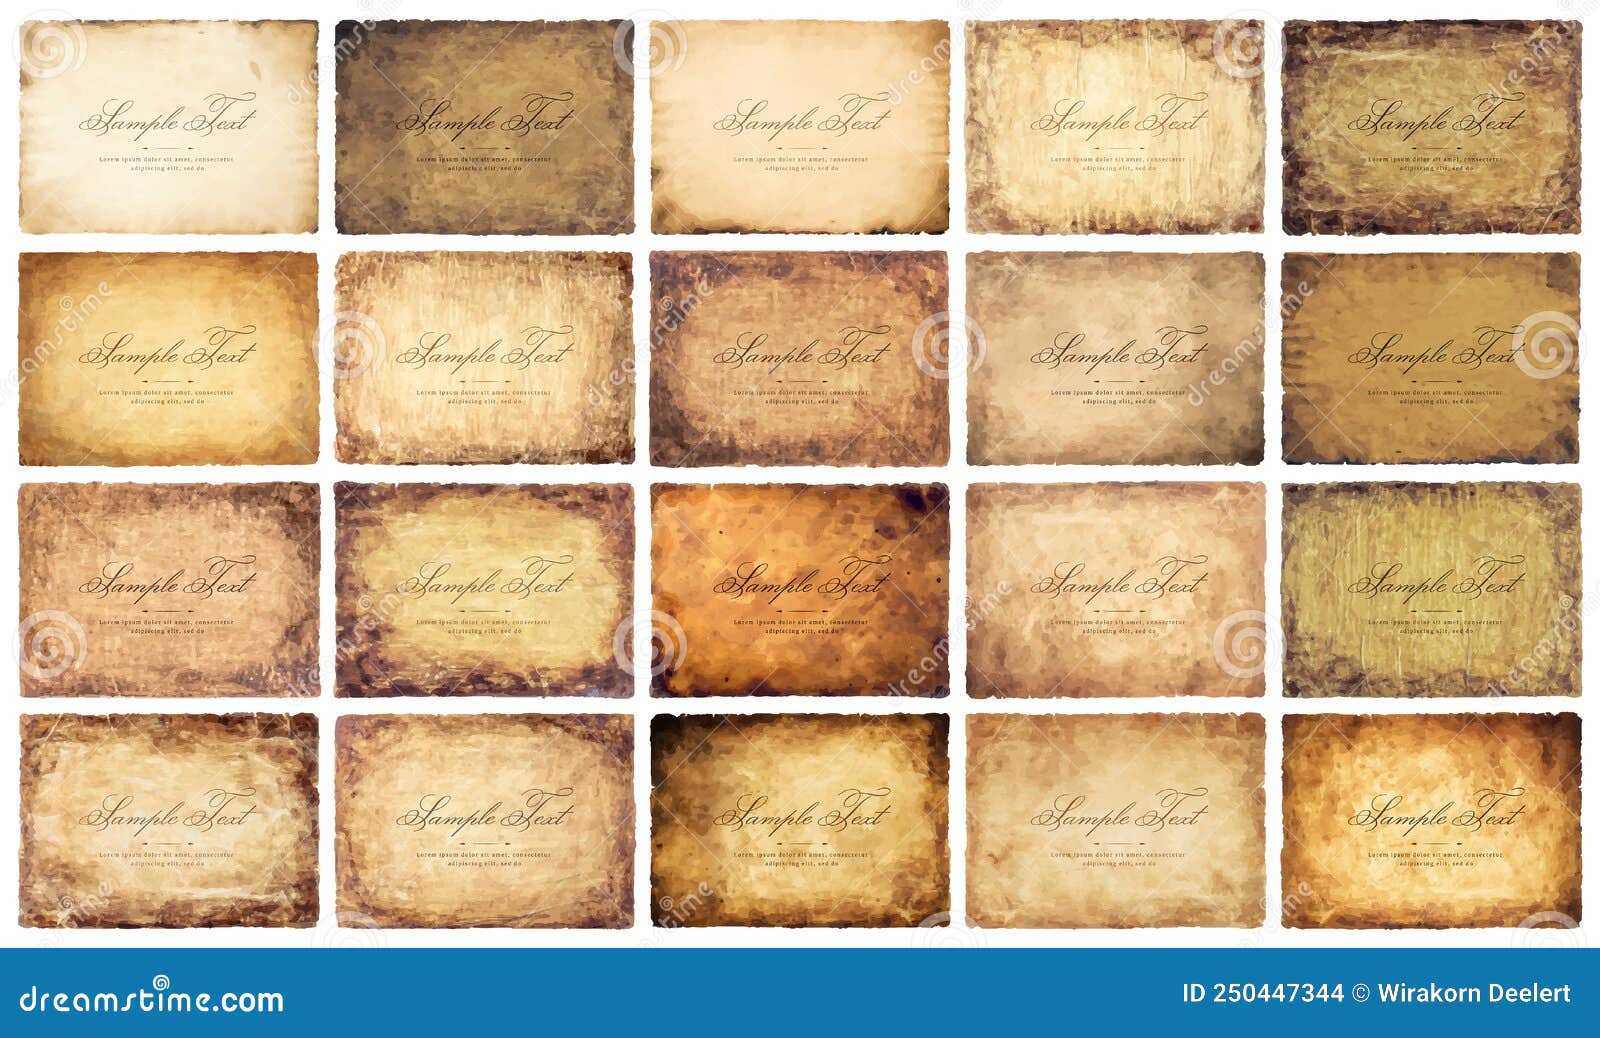 old parchment paper sheet vintage aged or texture isolated on